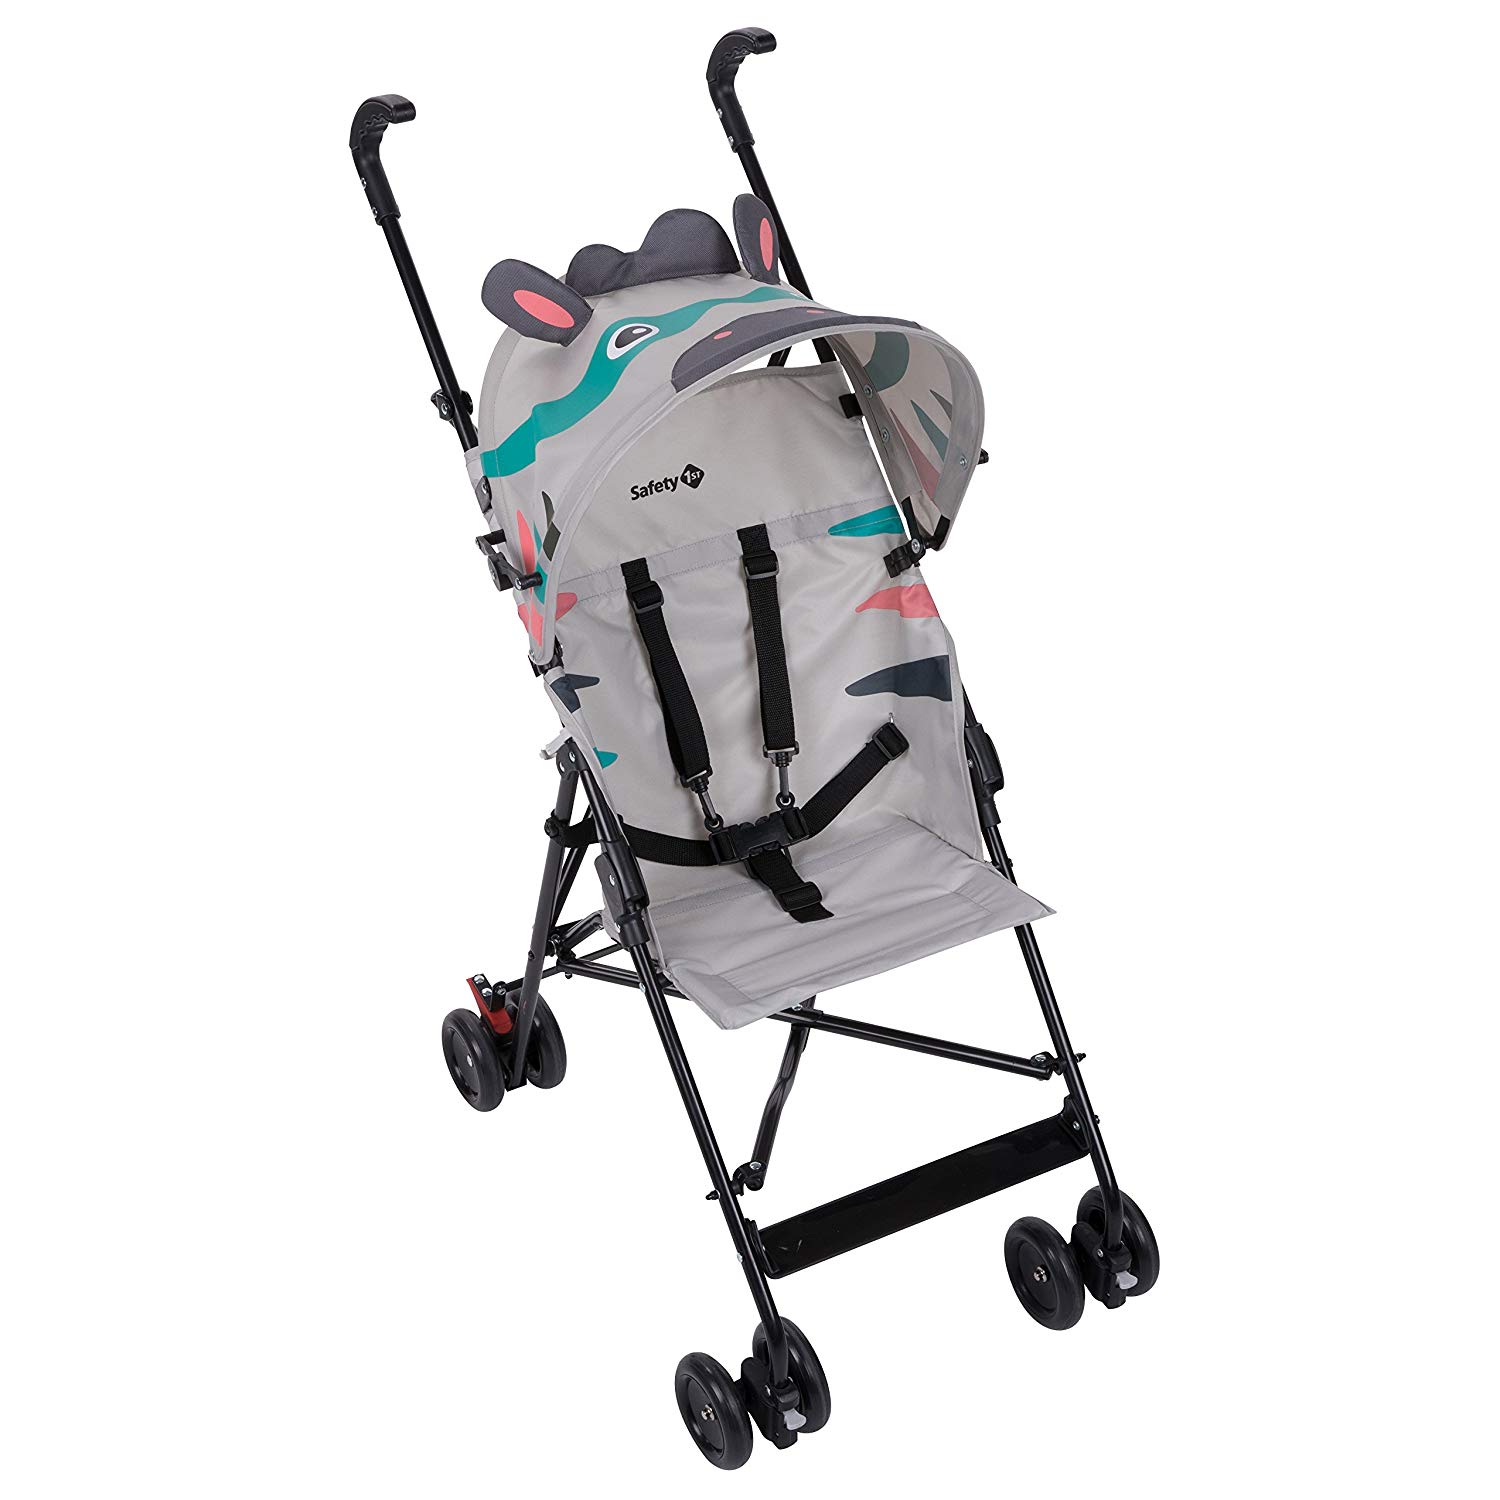 Safety 1st Peps Children’s Pushchair With Sun Canopy, Agile Pushchair